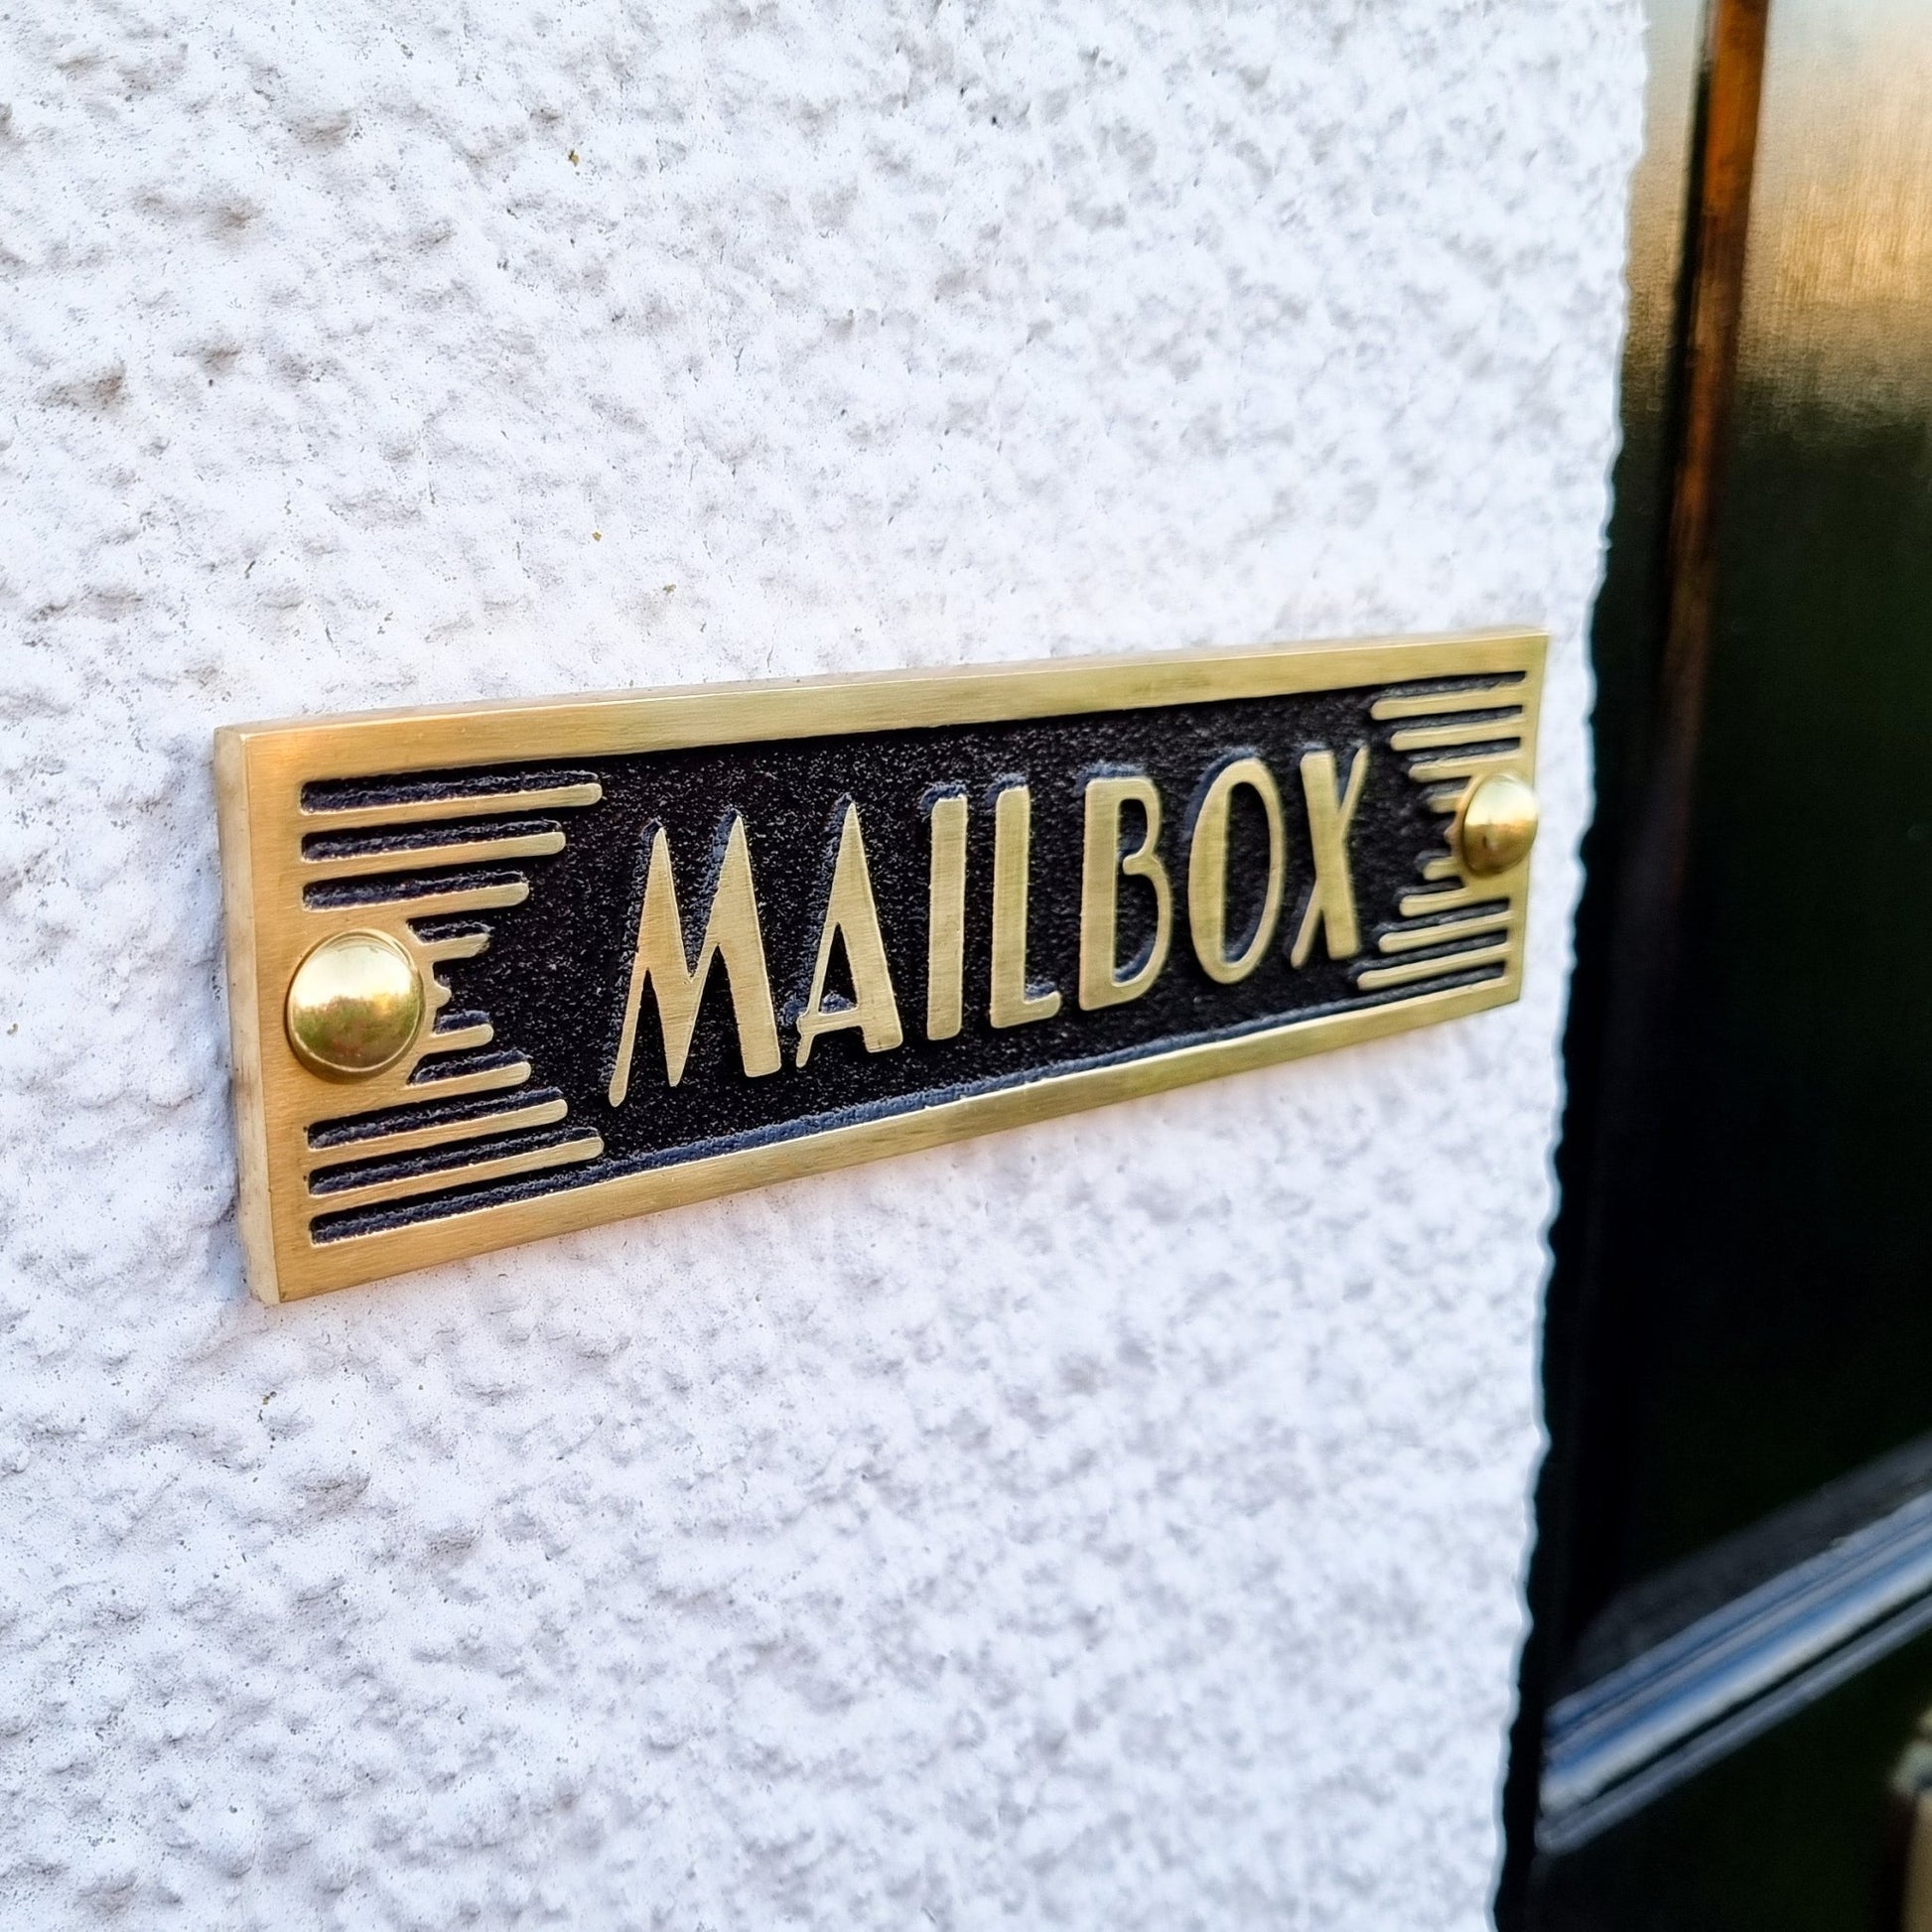 Art Deco 'Mailbox' Sign - The Metal Foundry